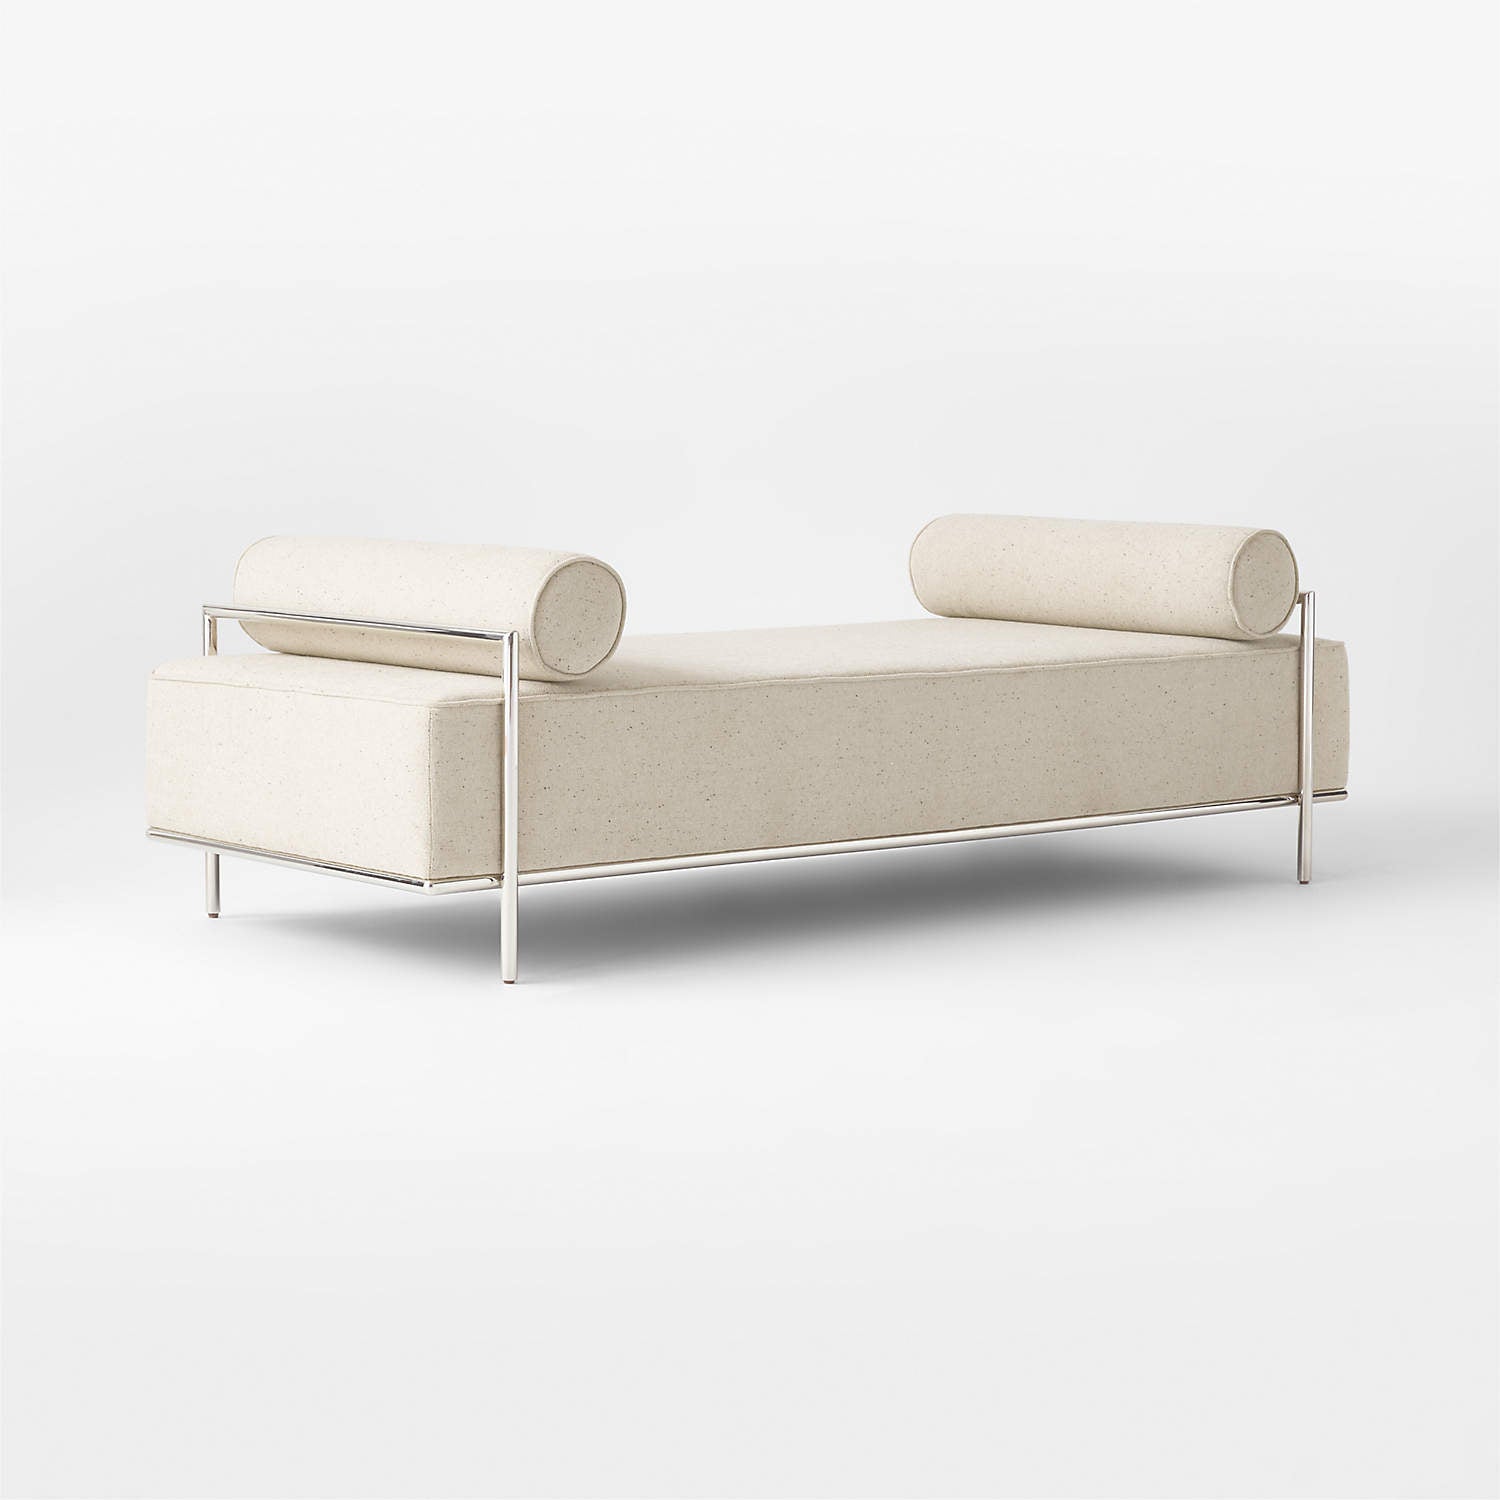 Melatee End of Bed Bench - INTERIORTONIC